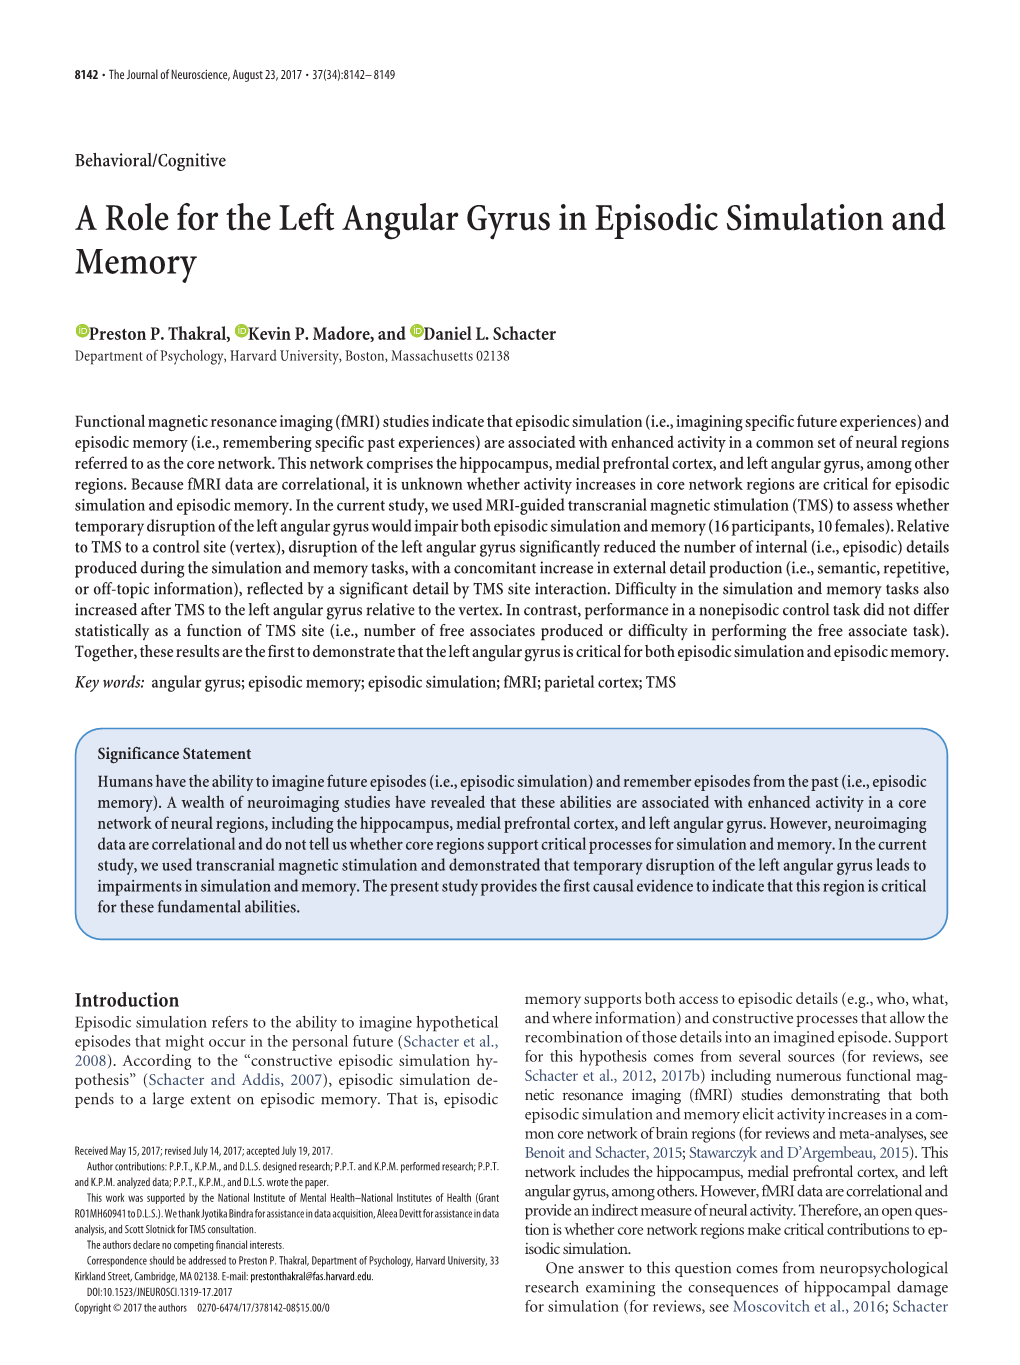 A Role for the Left Angular Gyrus in Episodic Simulation and Memory